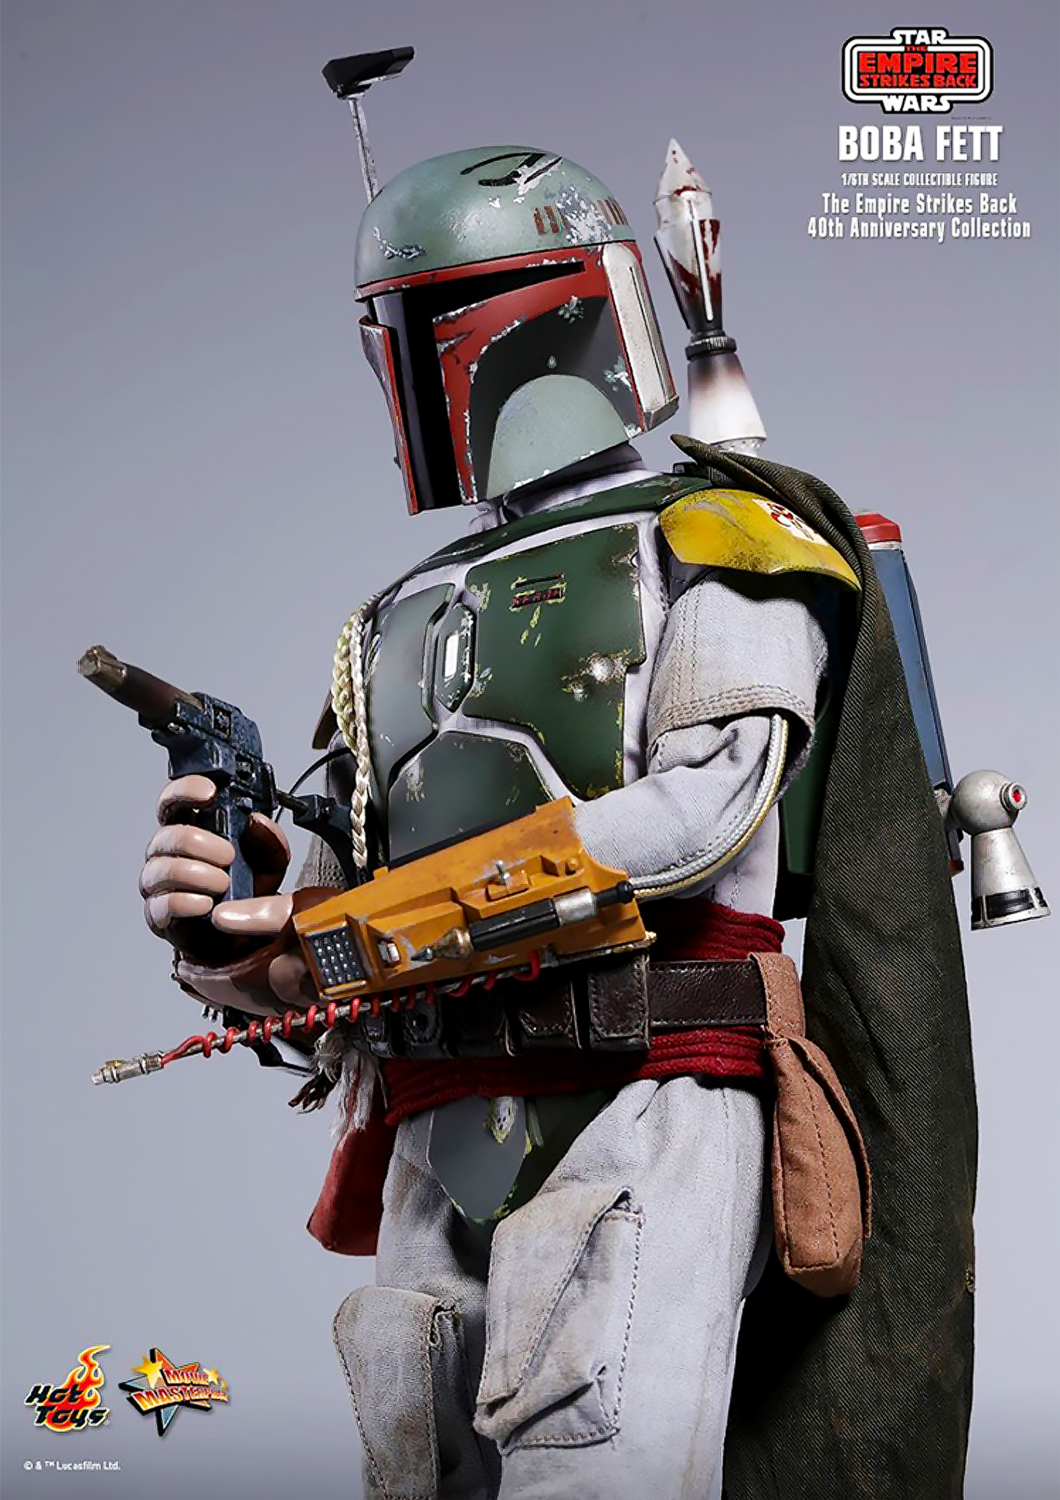 HOT TOYS STAR WARS BOBA FETT THE EMPIRE STRIKES BACK 40TH ANNIVERSARY COLLECTION 1/6 MMS574 - Anotoys Collectibles